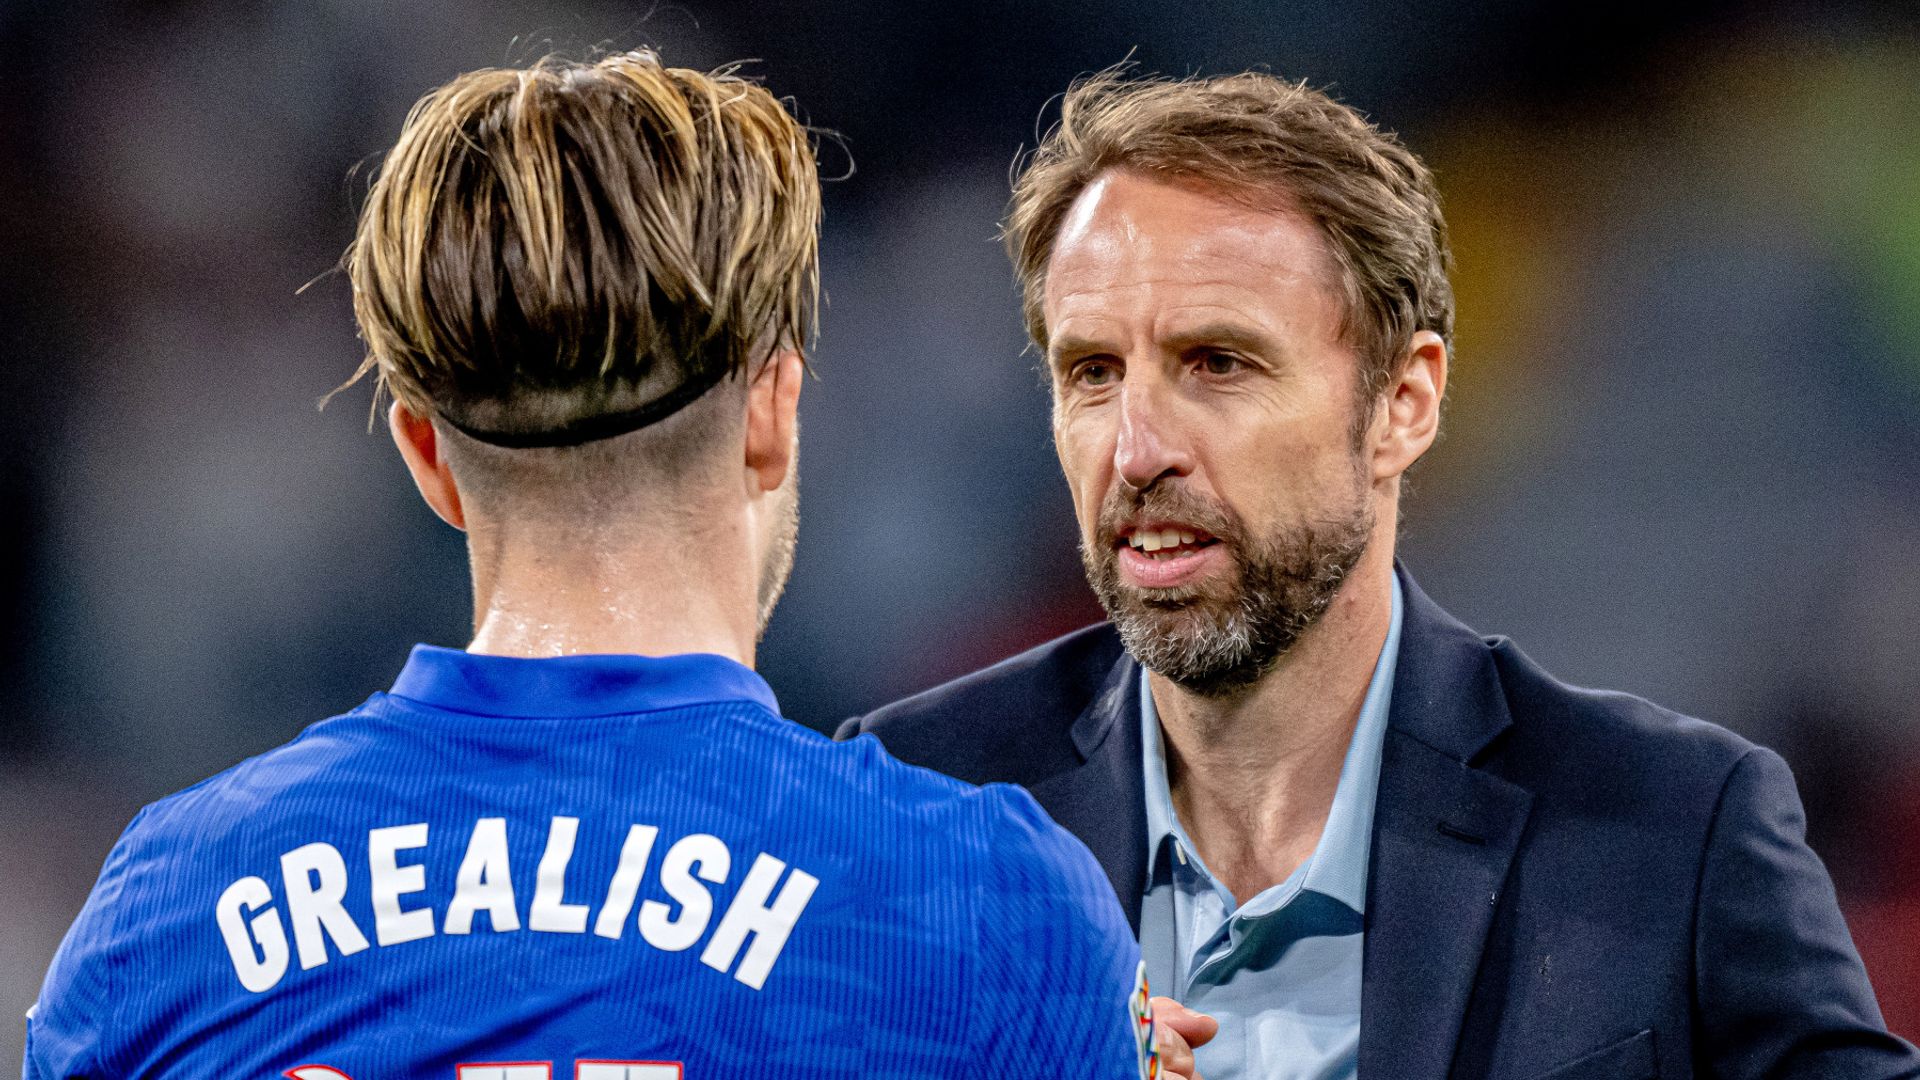 Southgate: Grealish impressed vs Germany but can improve tactically